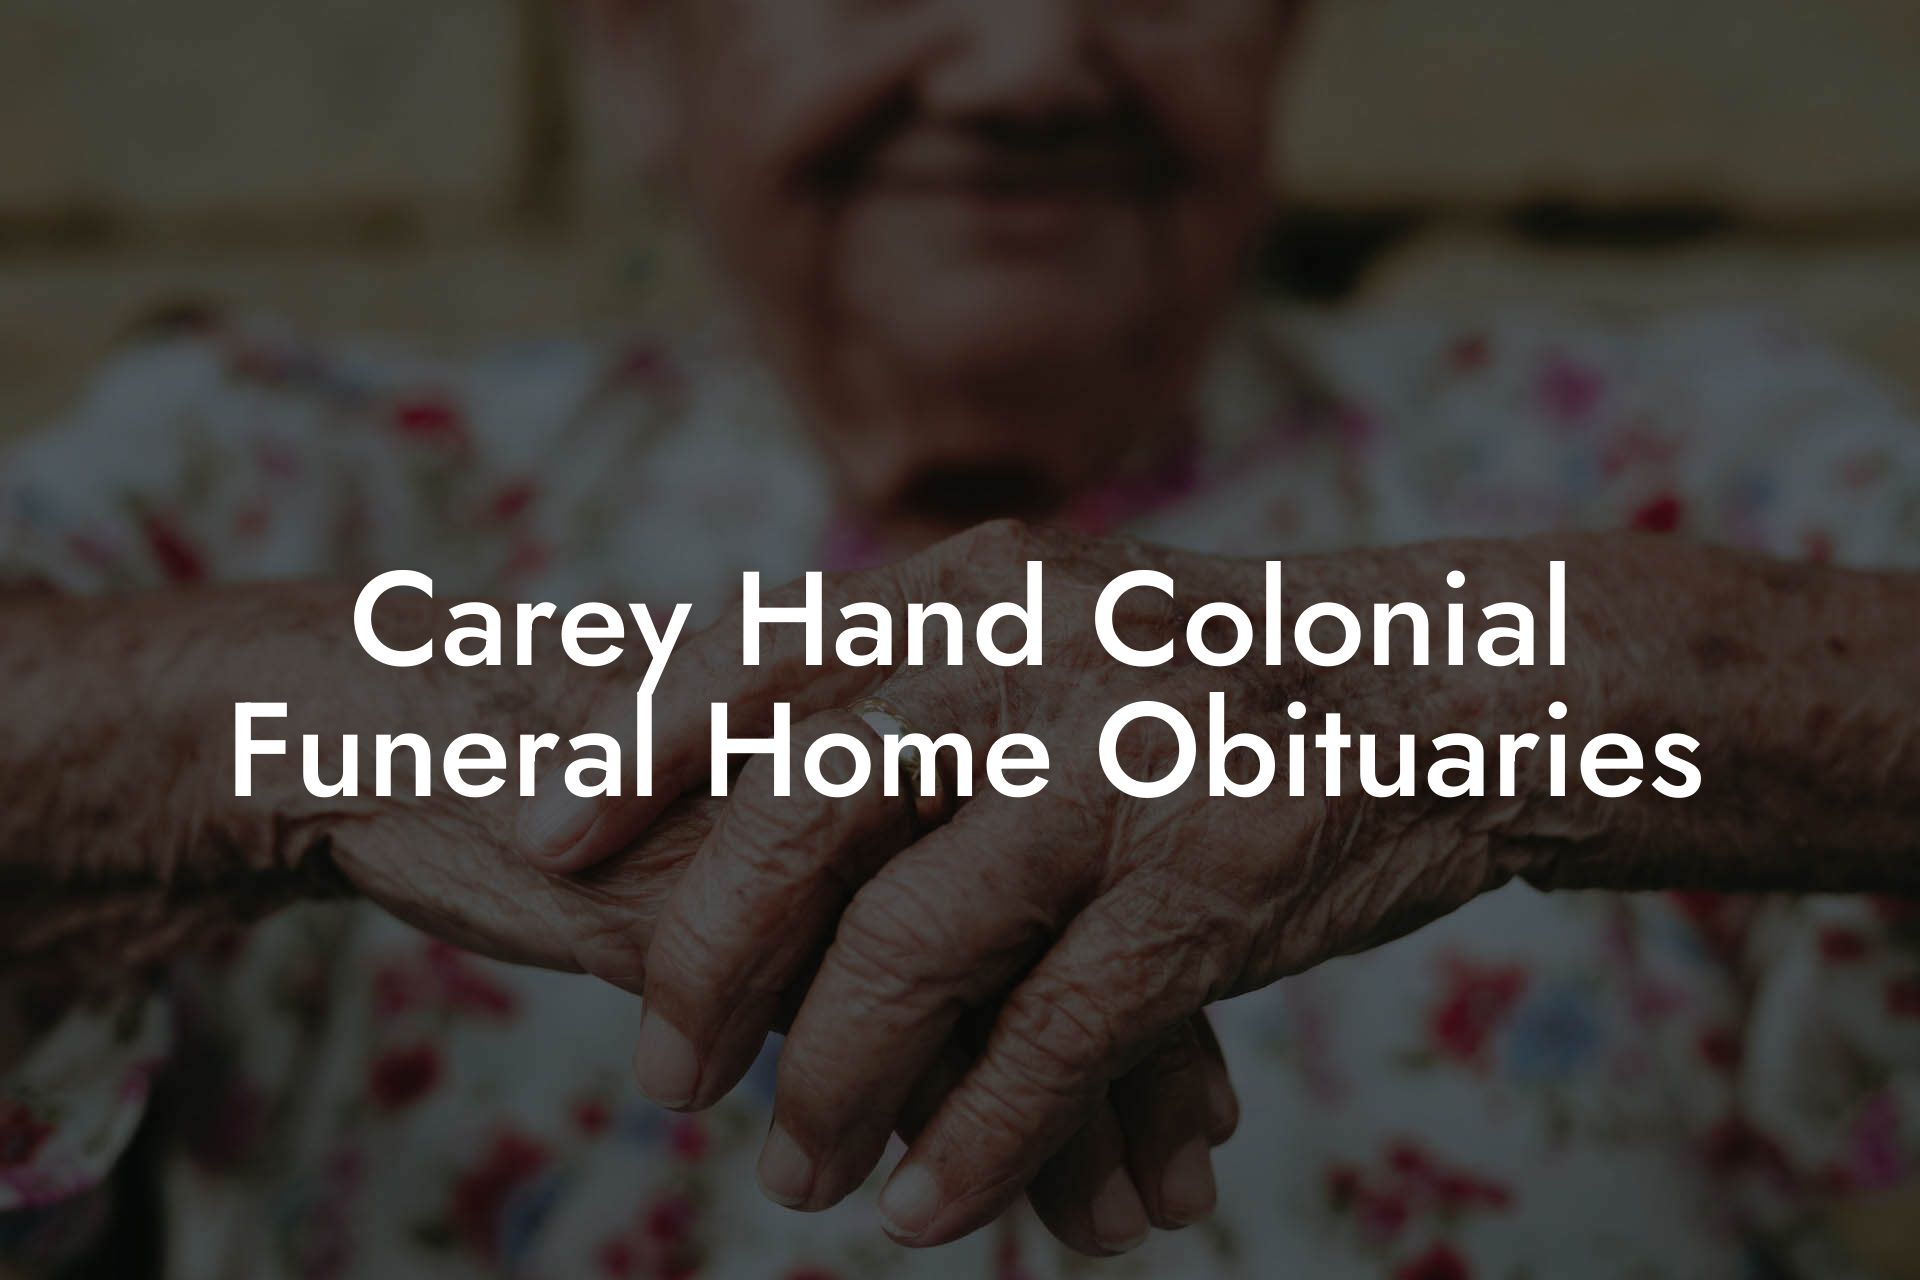 Carey Hand Colonial Funeral Home Obituaries